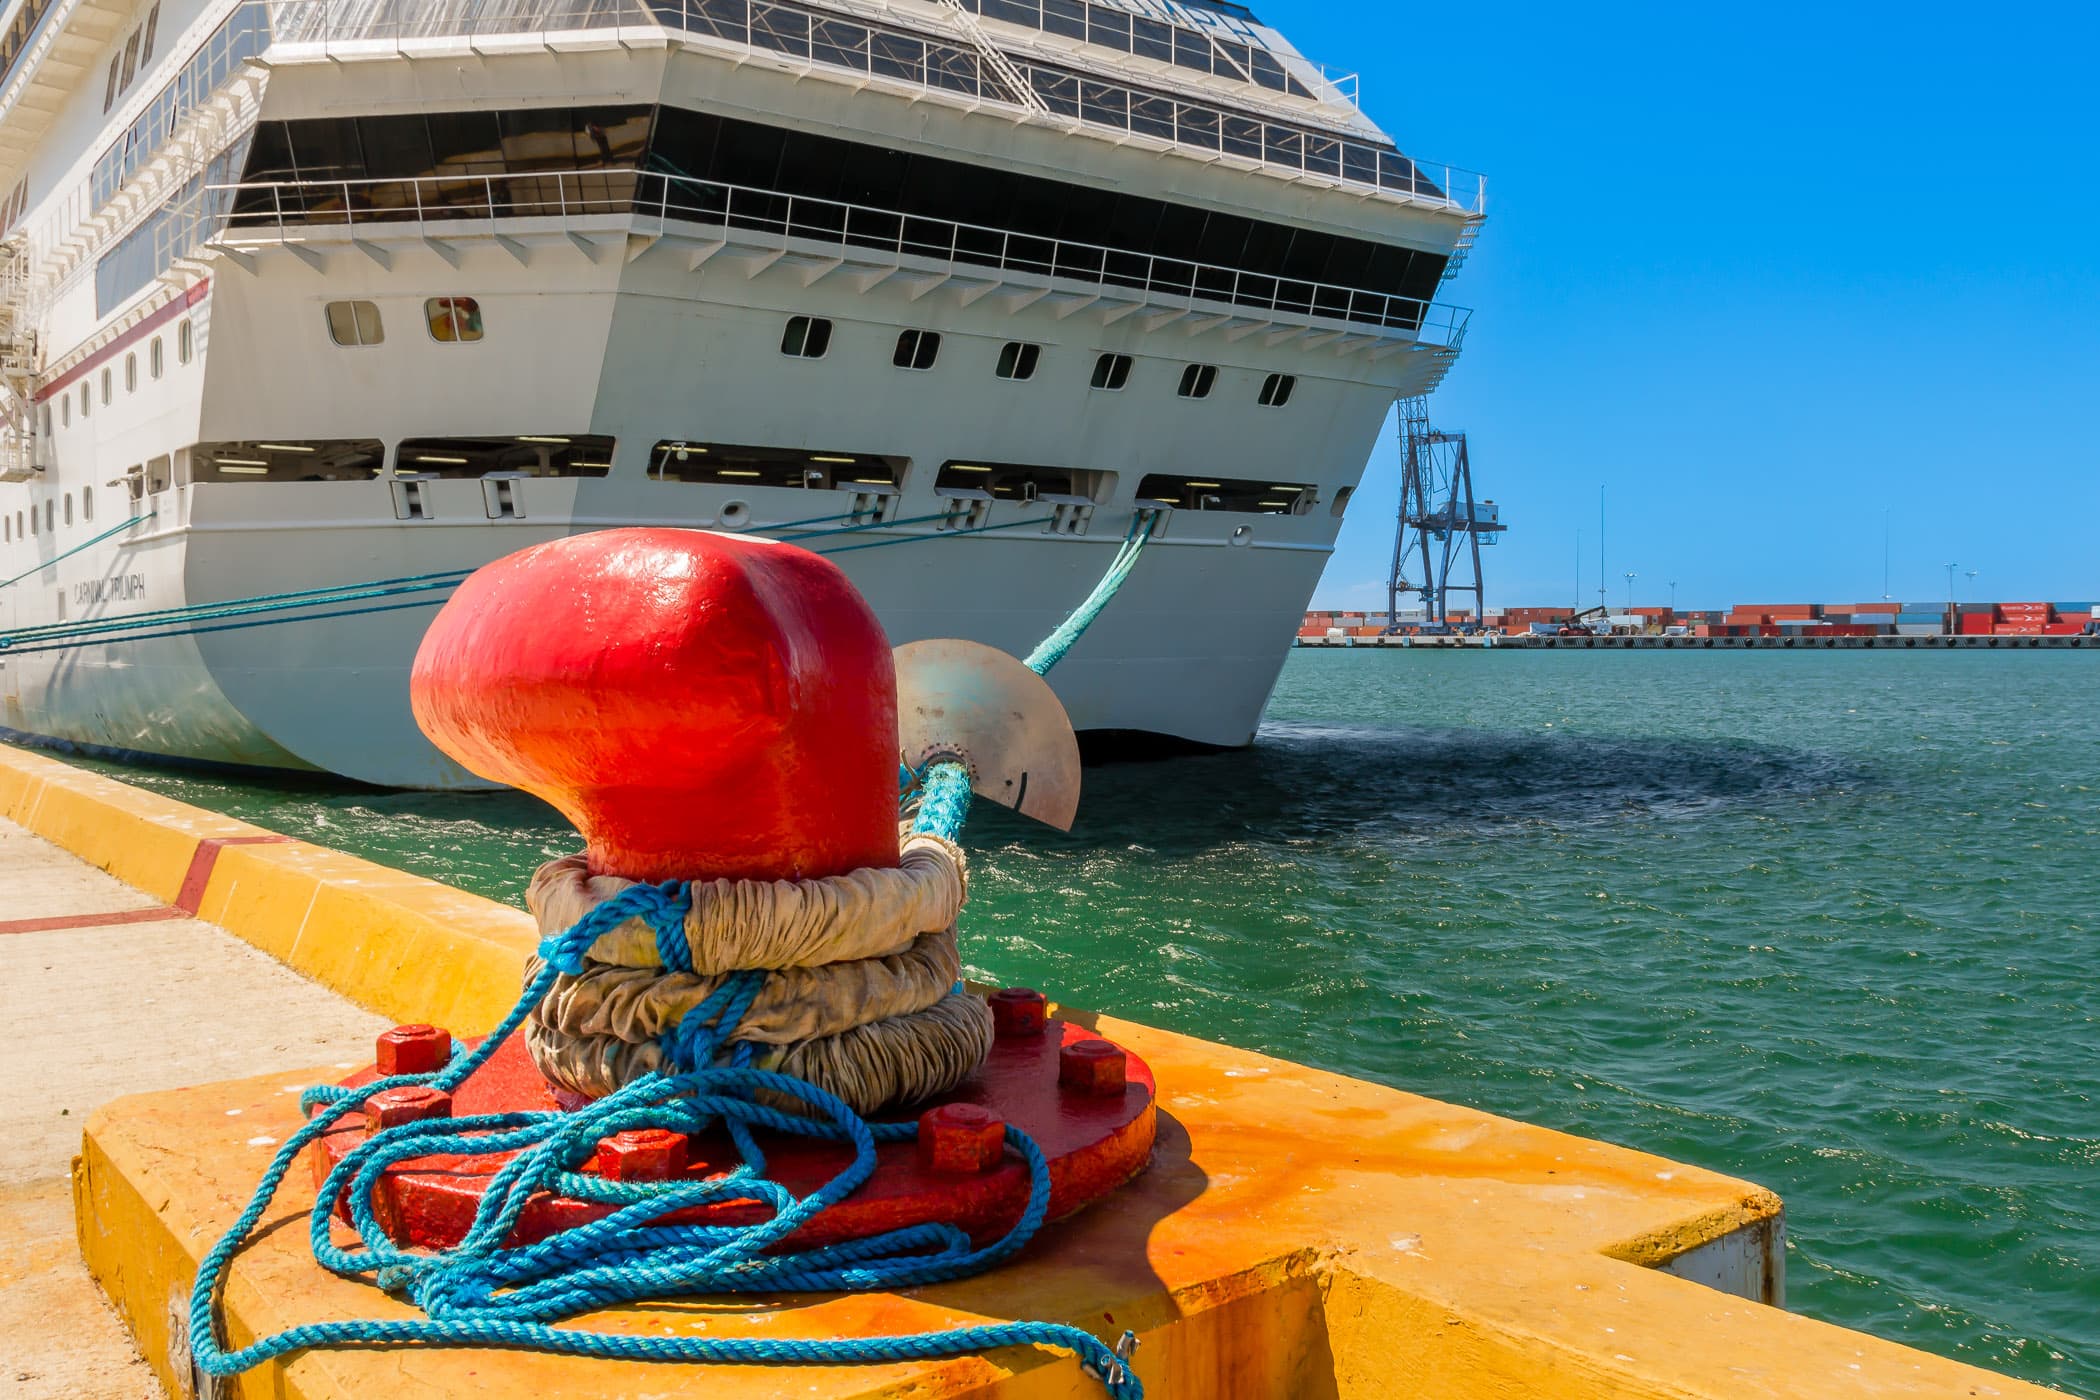 A hawser, or large rope, ties the Carnival Triumph to a dock's bitt at Progreso, Mexico.